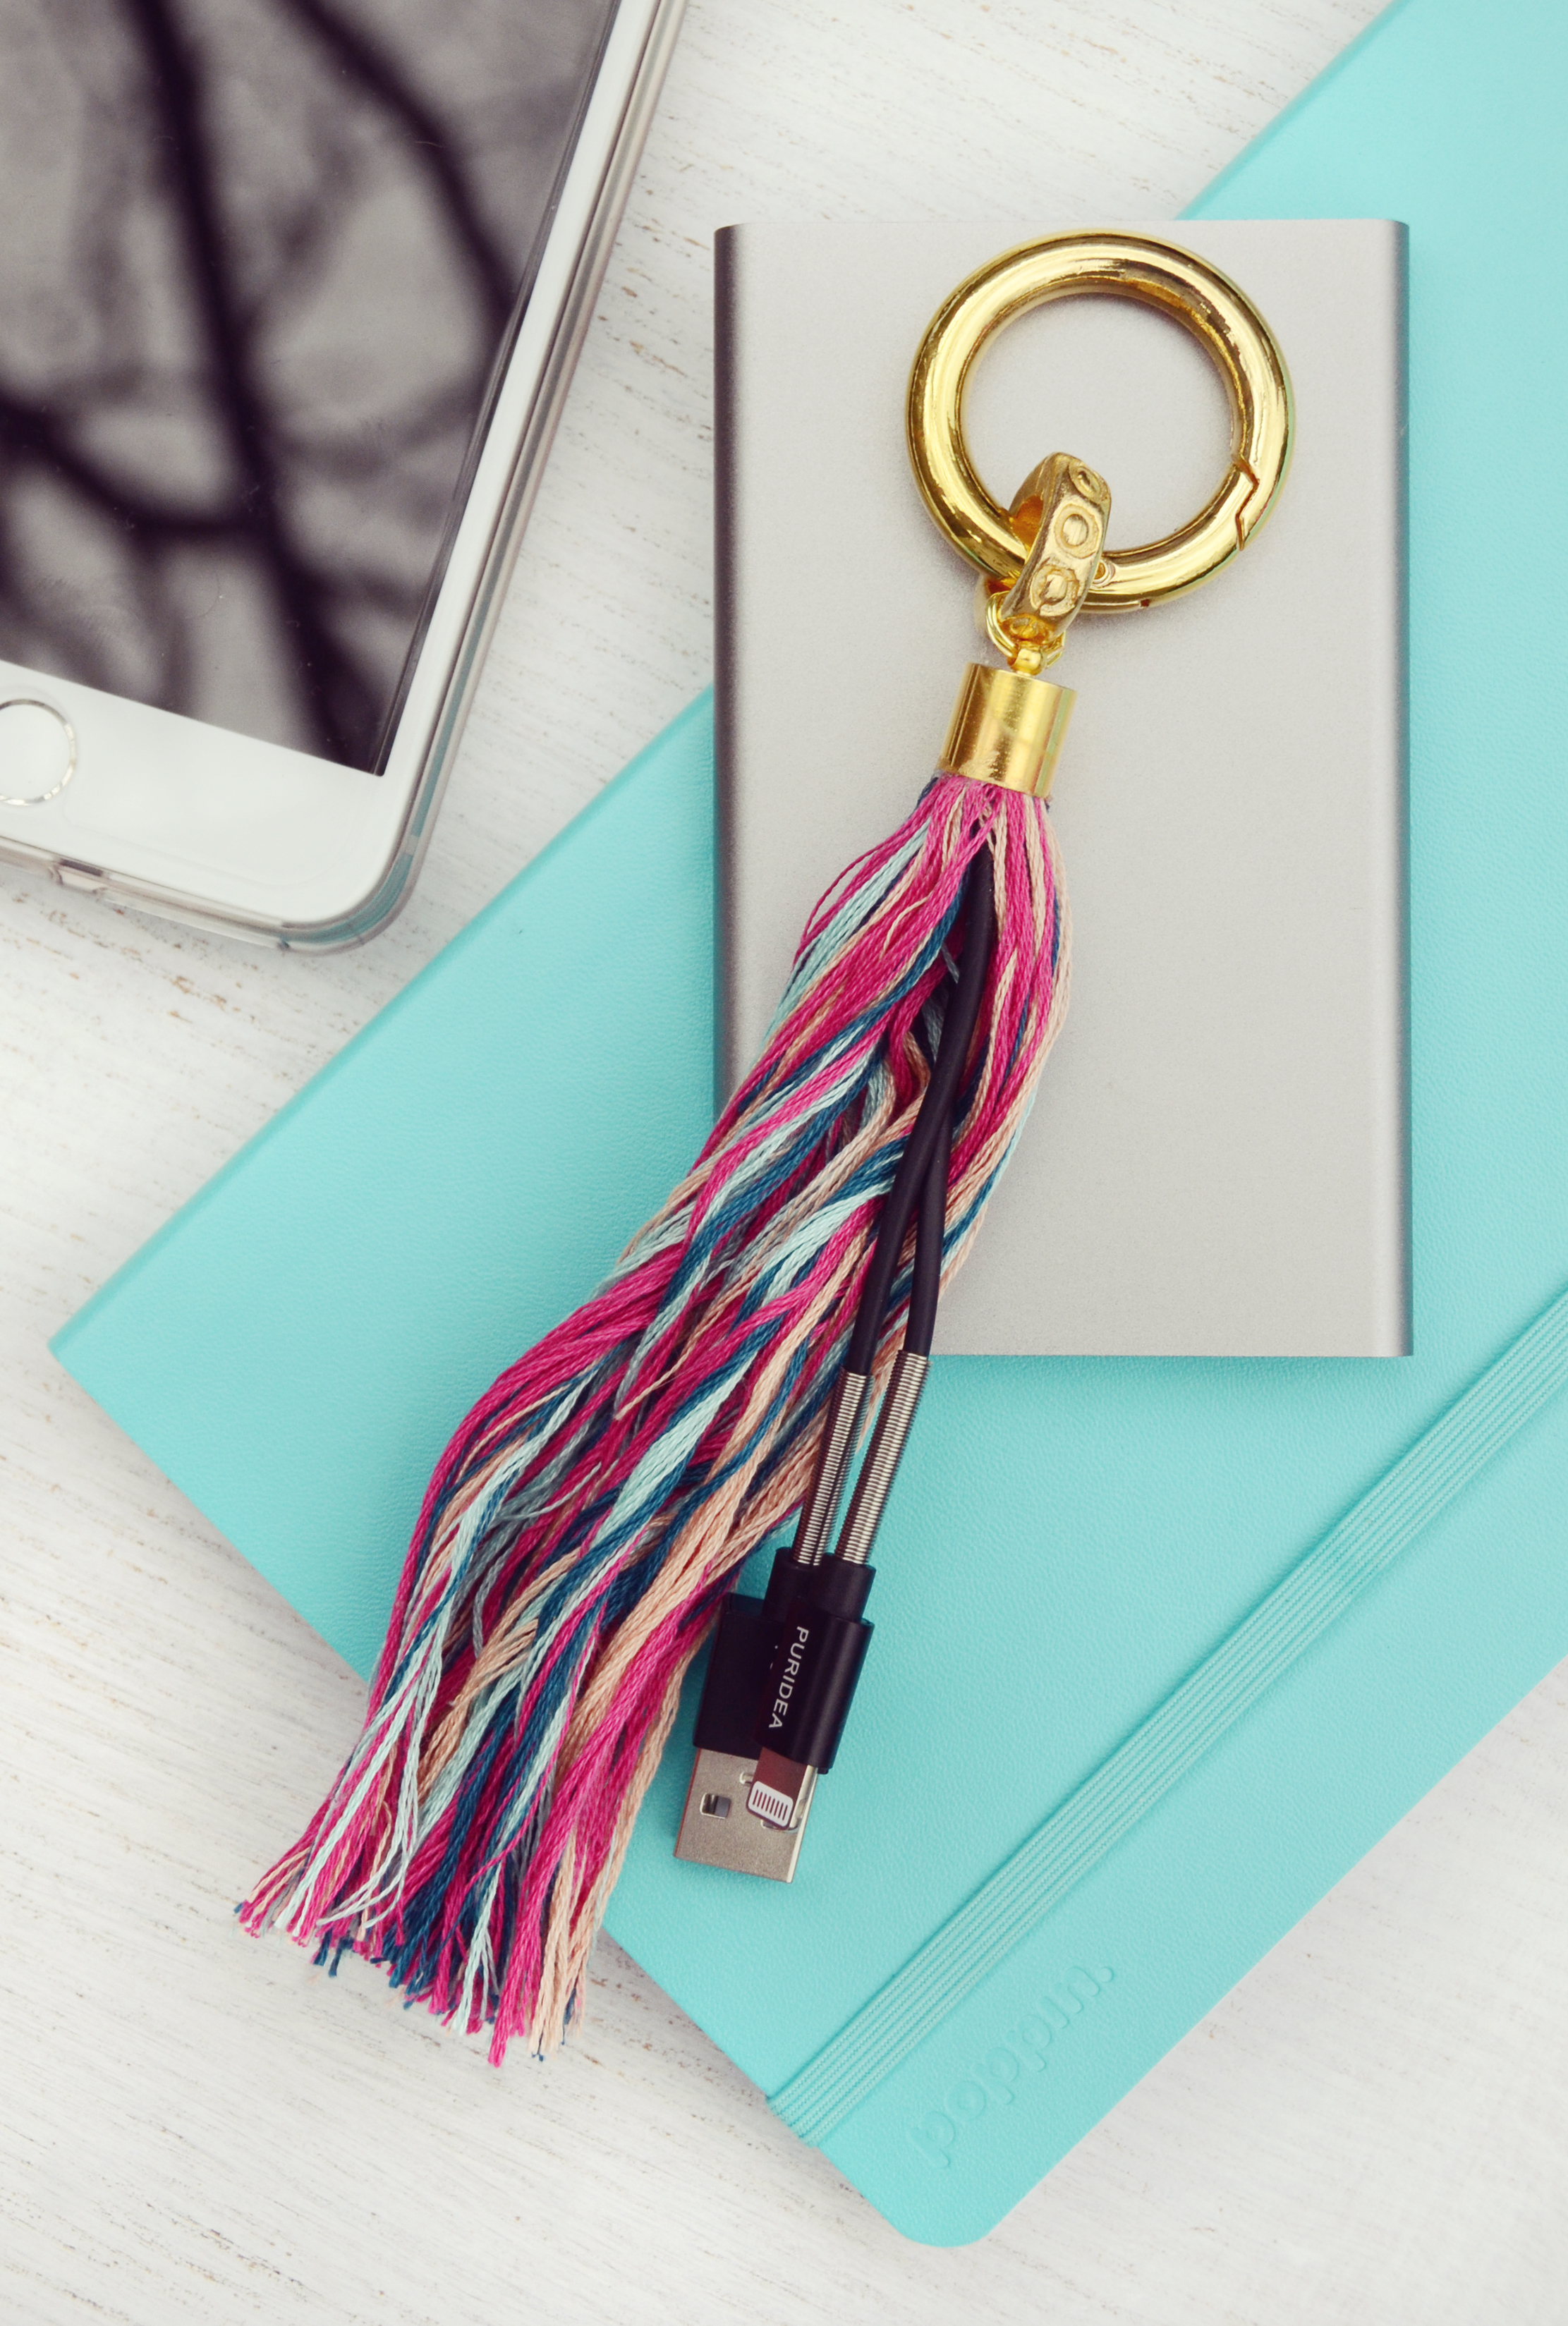 Easy DIY Phone Charging Cable Tassel | A Colorful Craft Project by Faith Towers Provencher of Design Fixation